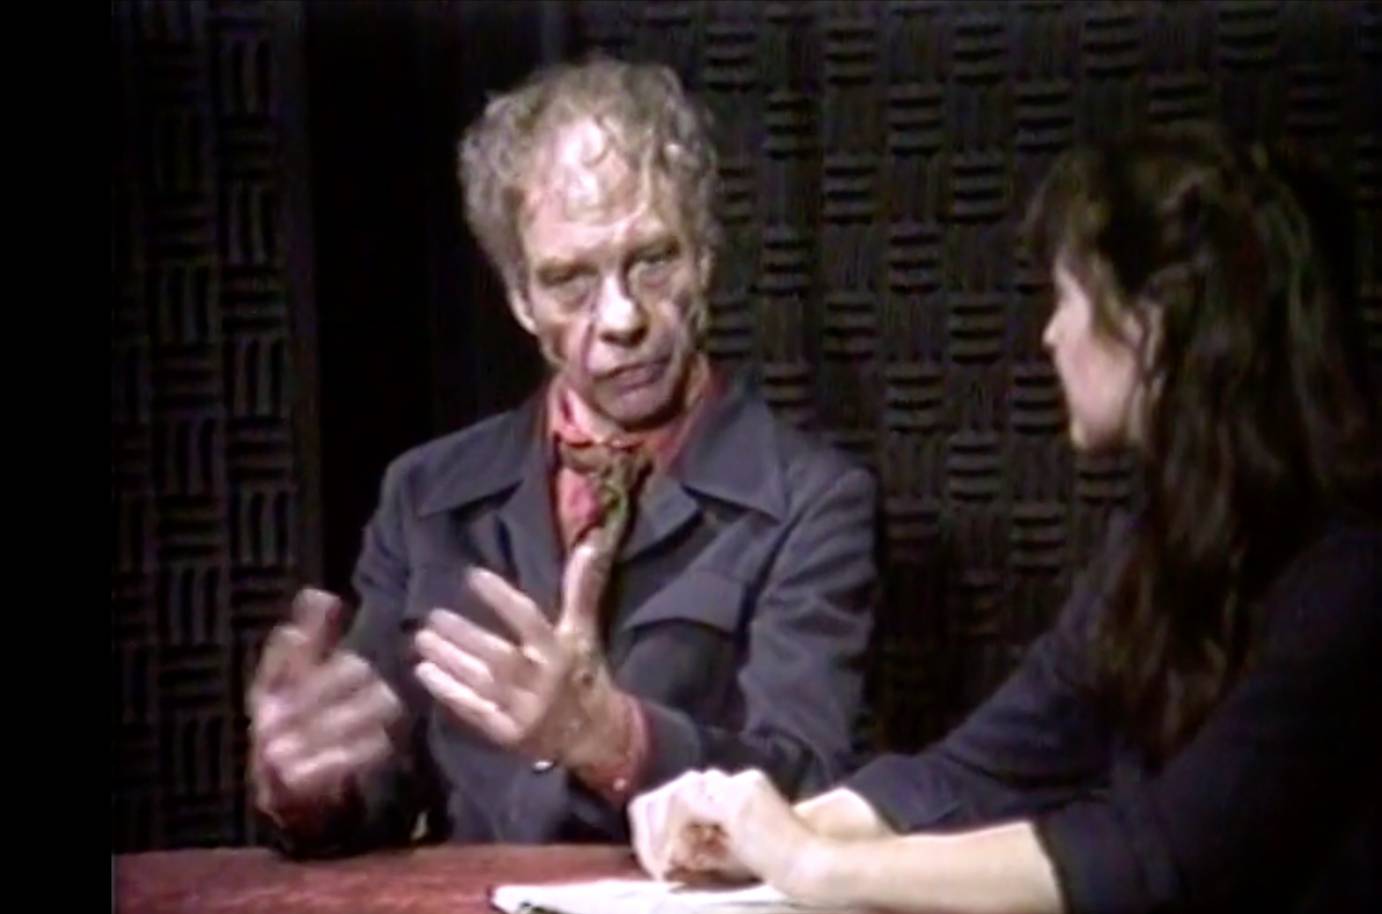 Merce Cunningham white choreographer innovator in purple 1970's style jacket with salmon shirt and a brown scarf is interviewed by a white woman Celia Ipiotis with dark brown hair wearing a purple top